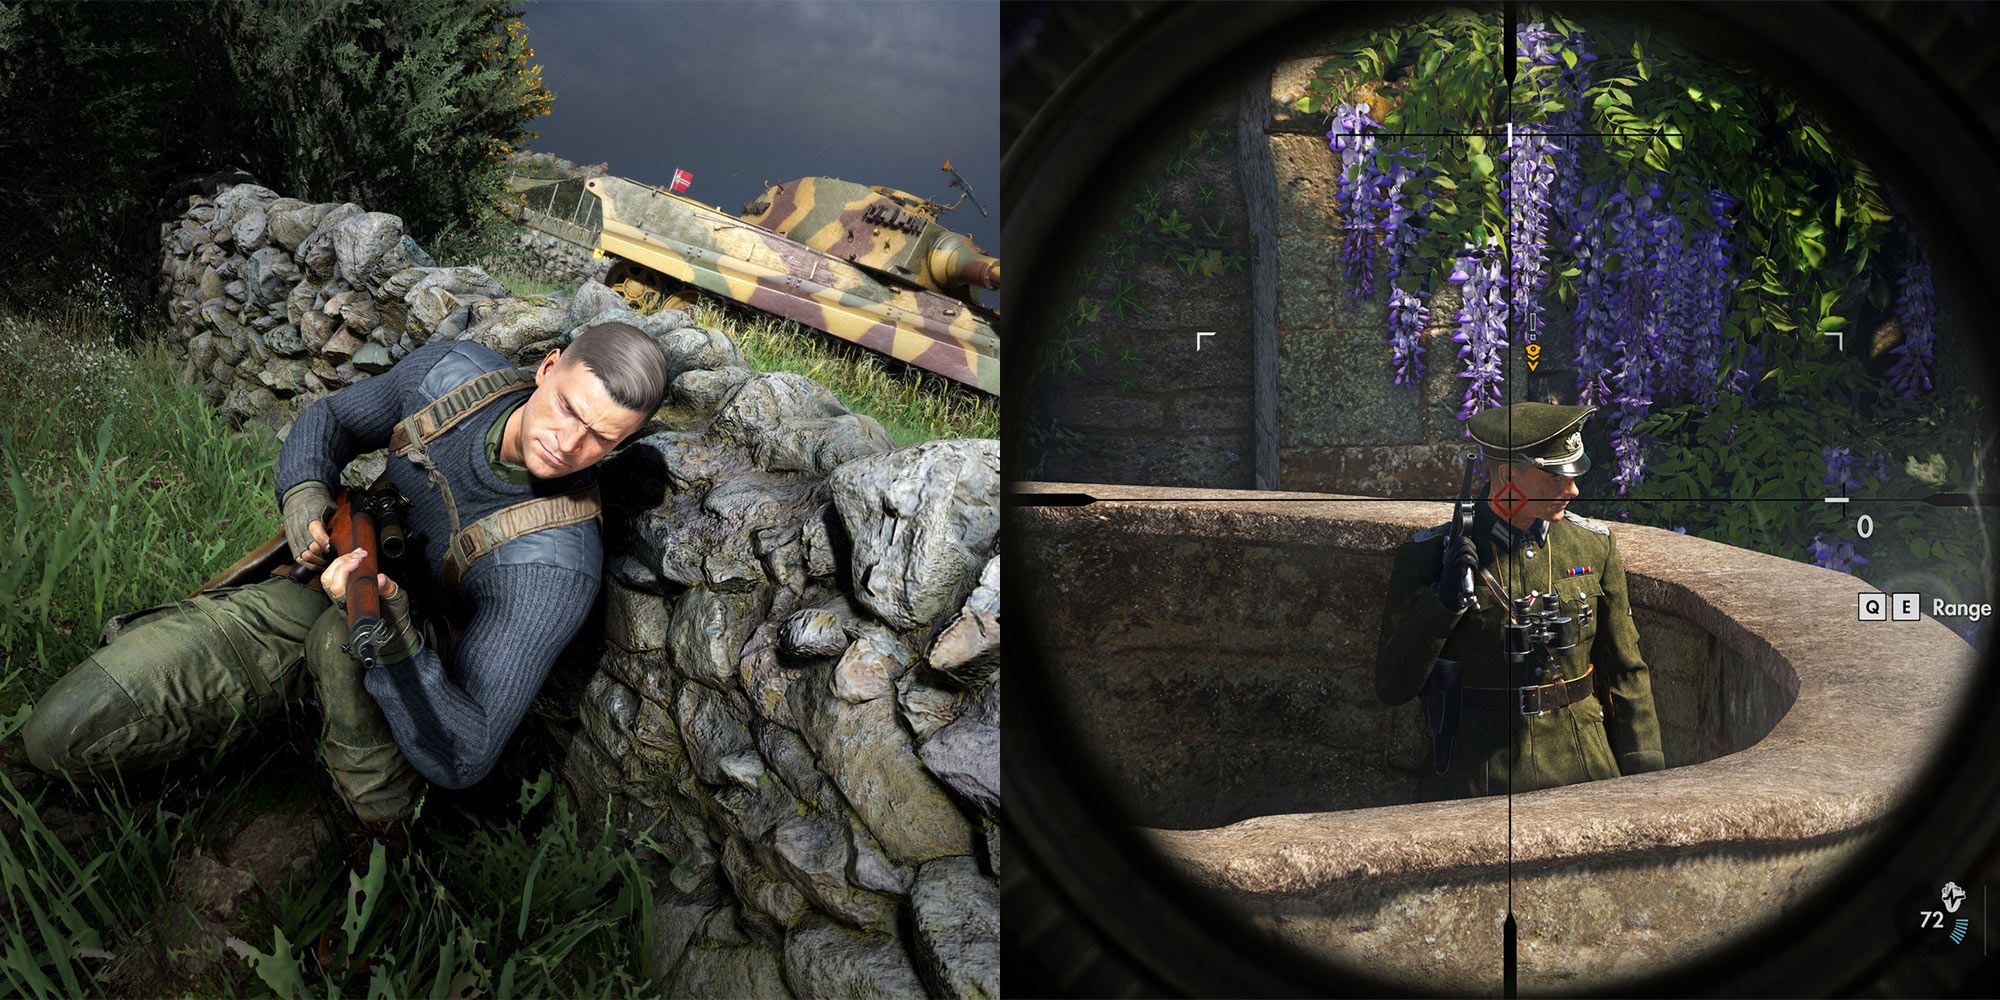 A collage showing gameplay in Sniper Elite 5